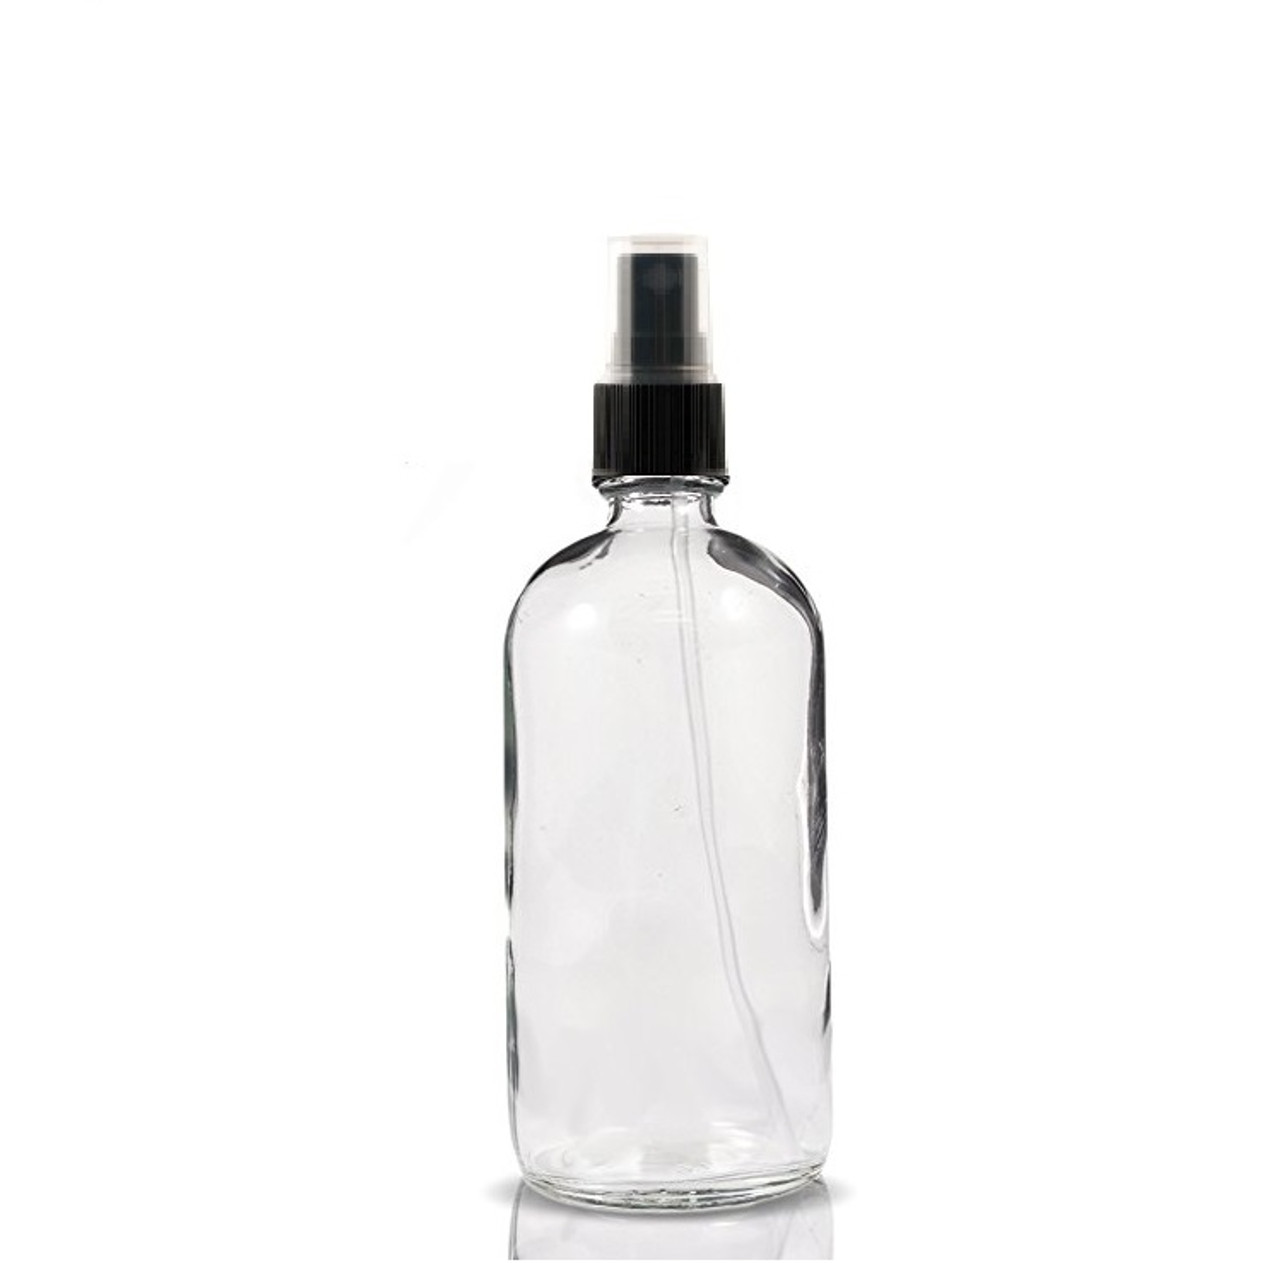 16 oz Clear Boston Round Glass Bottle with Black Cap